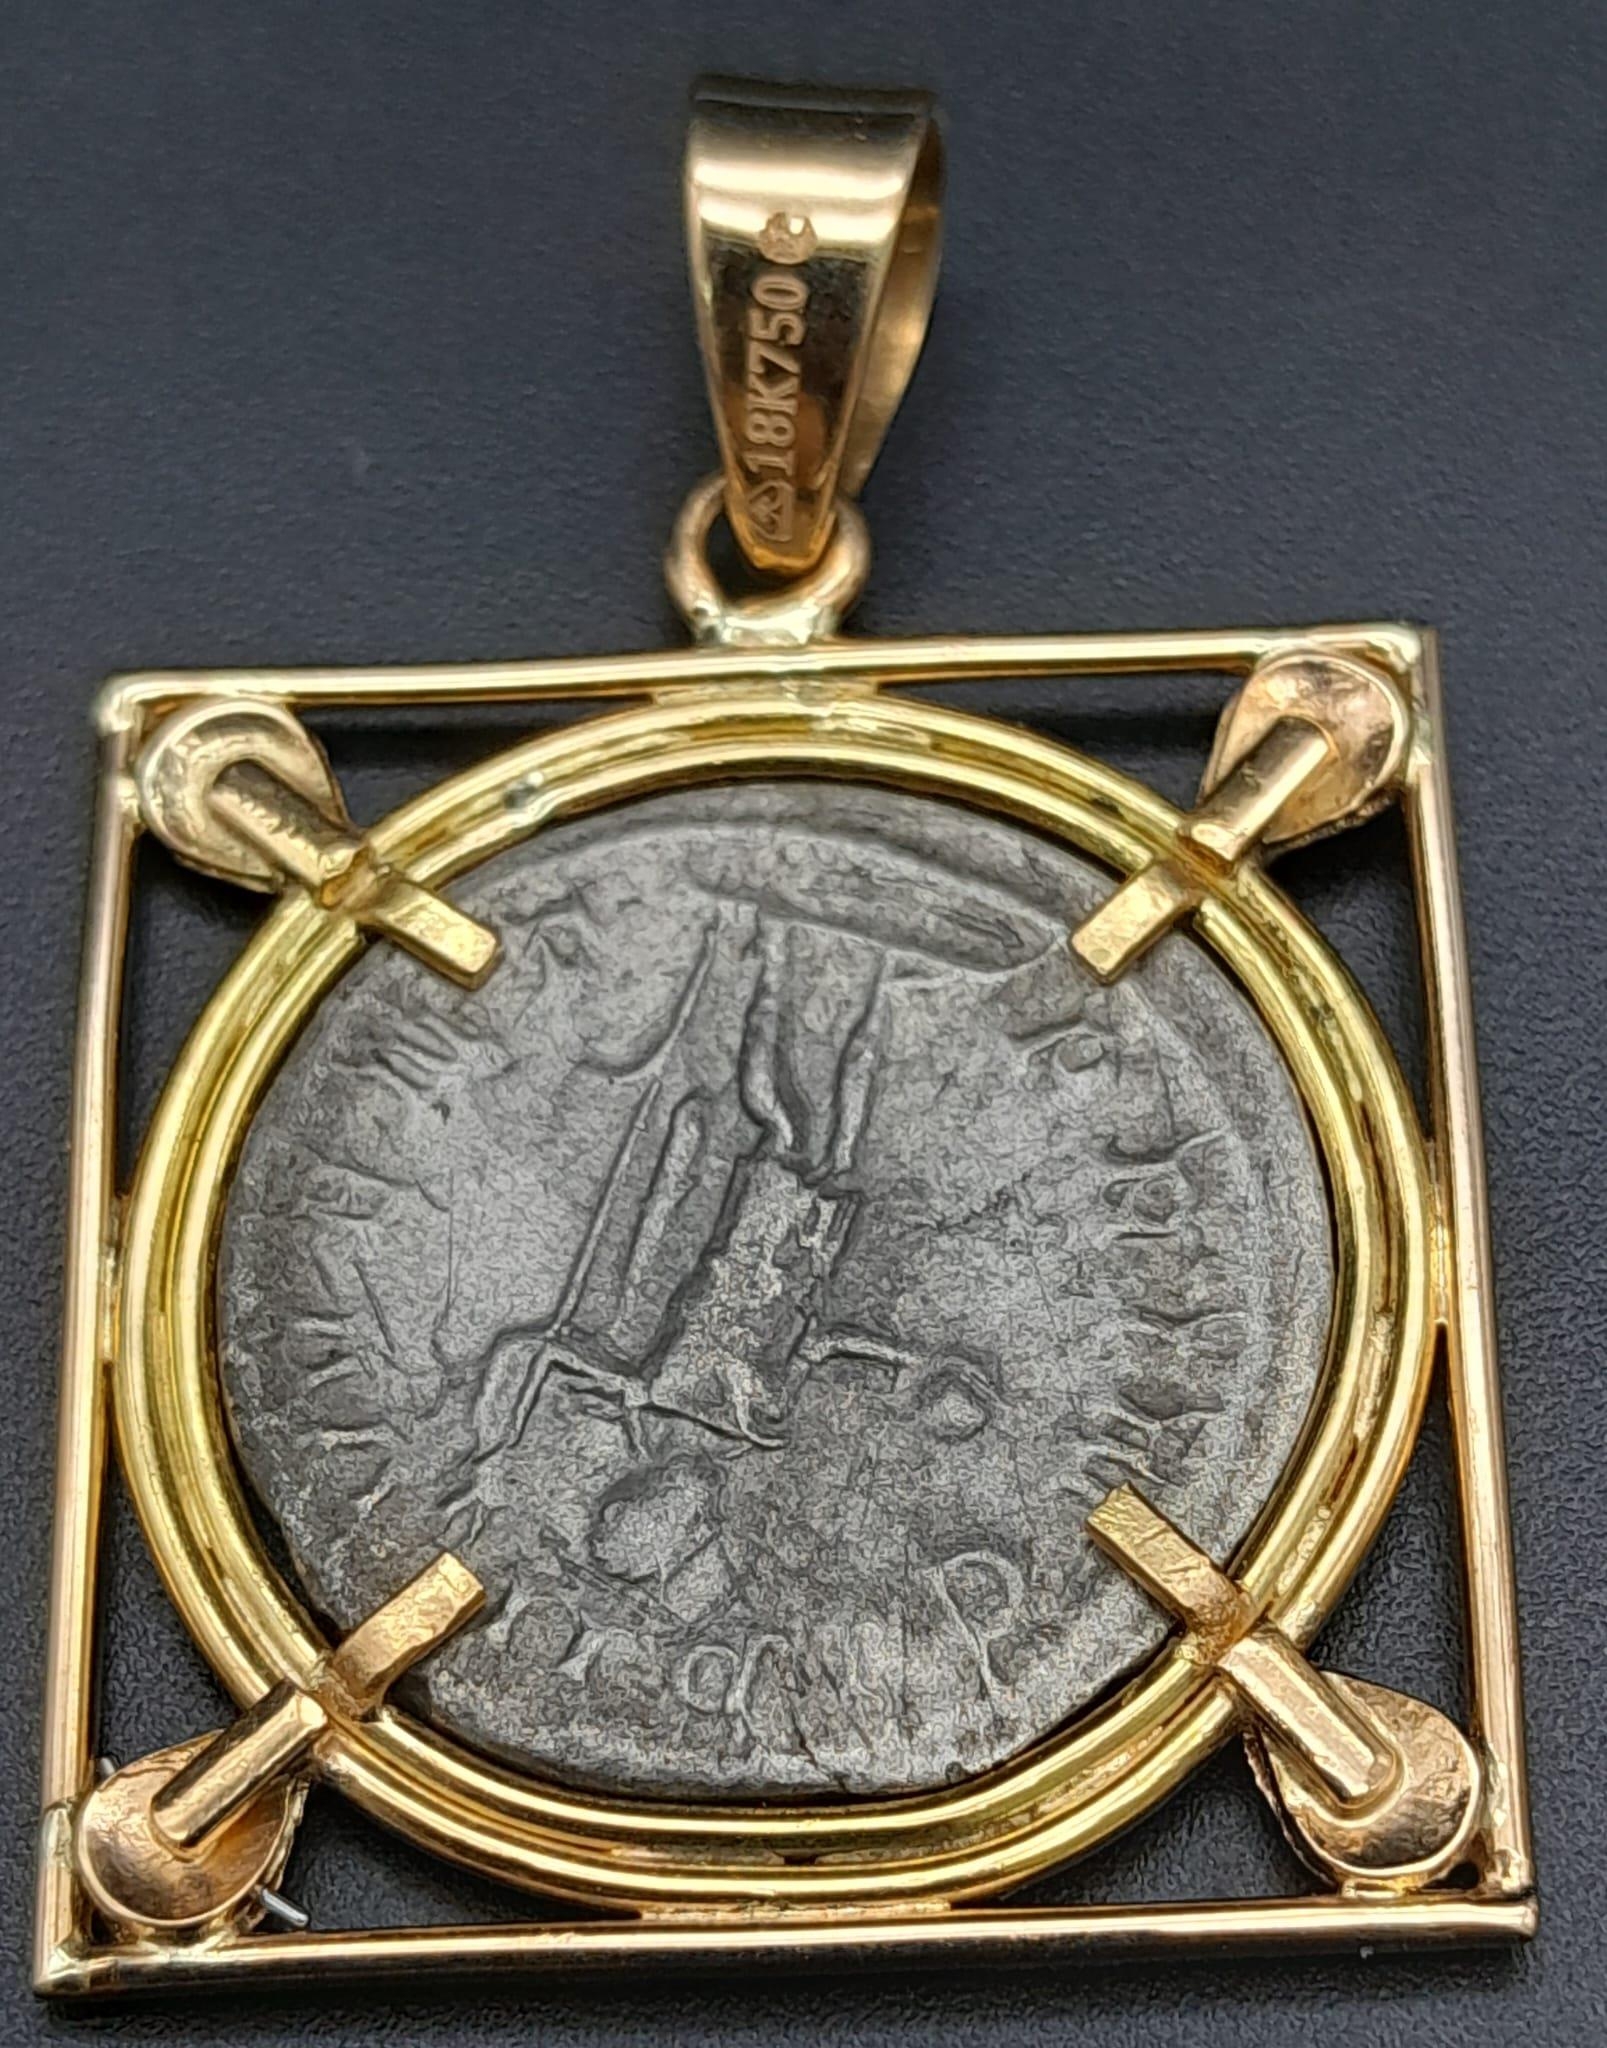 An Ancient Roman Rare Coin Pendant set in 18K Yellow gold - with Old Dealer's Ticket. 4.16 Ct. 10. - Image 2 of 6